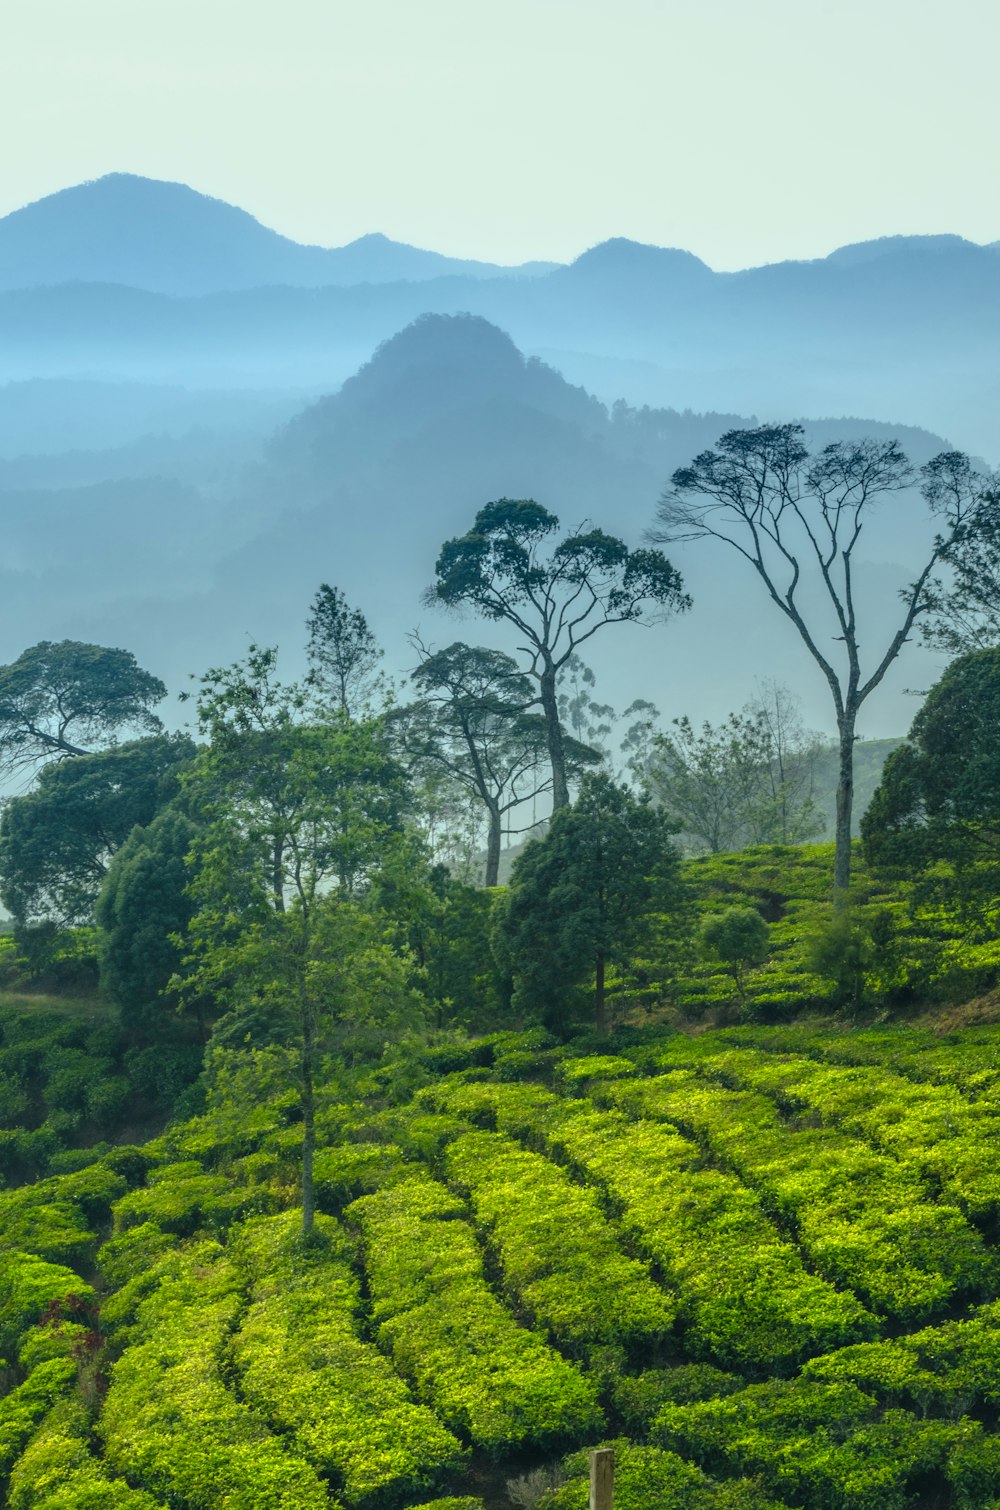 a lush green tea field with mountains in the background